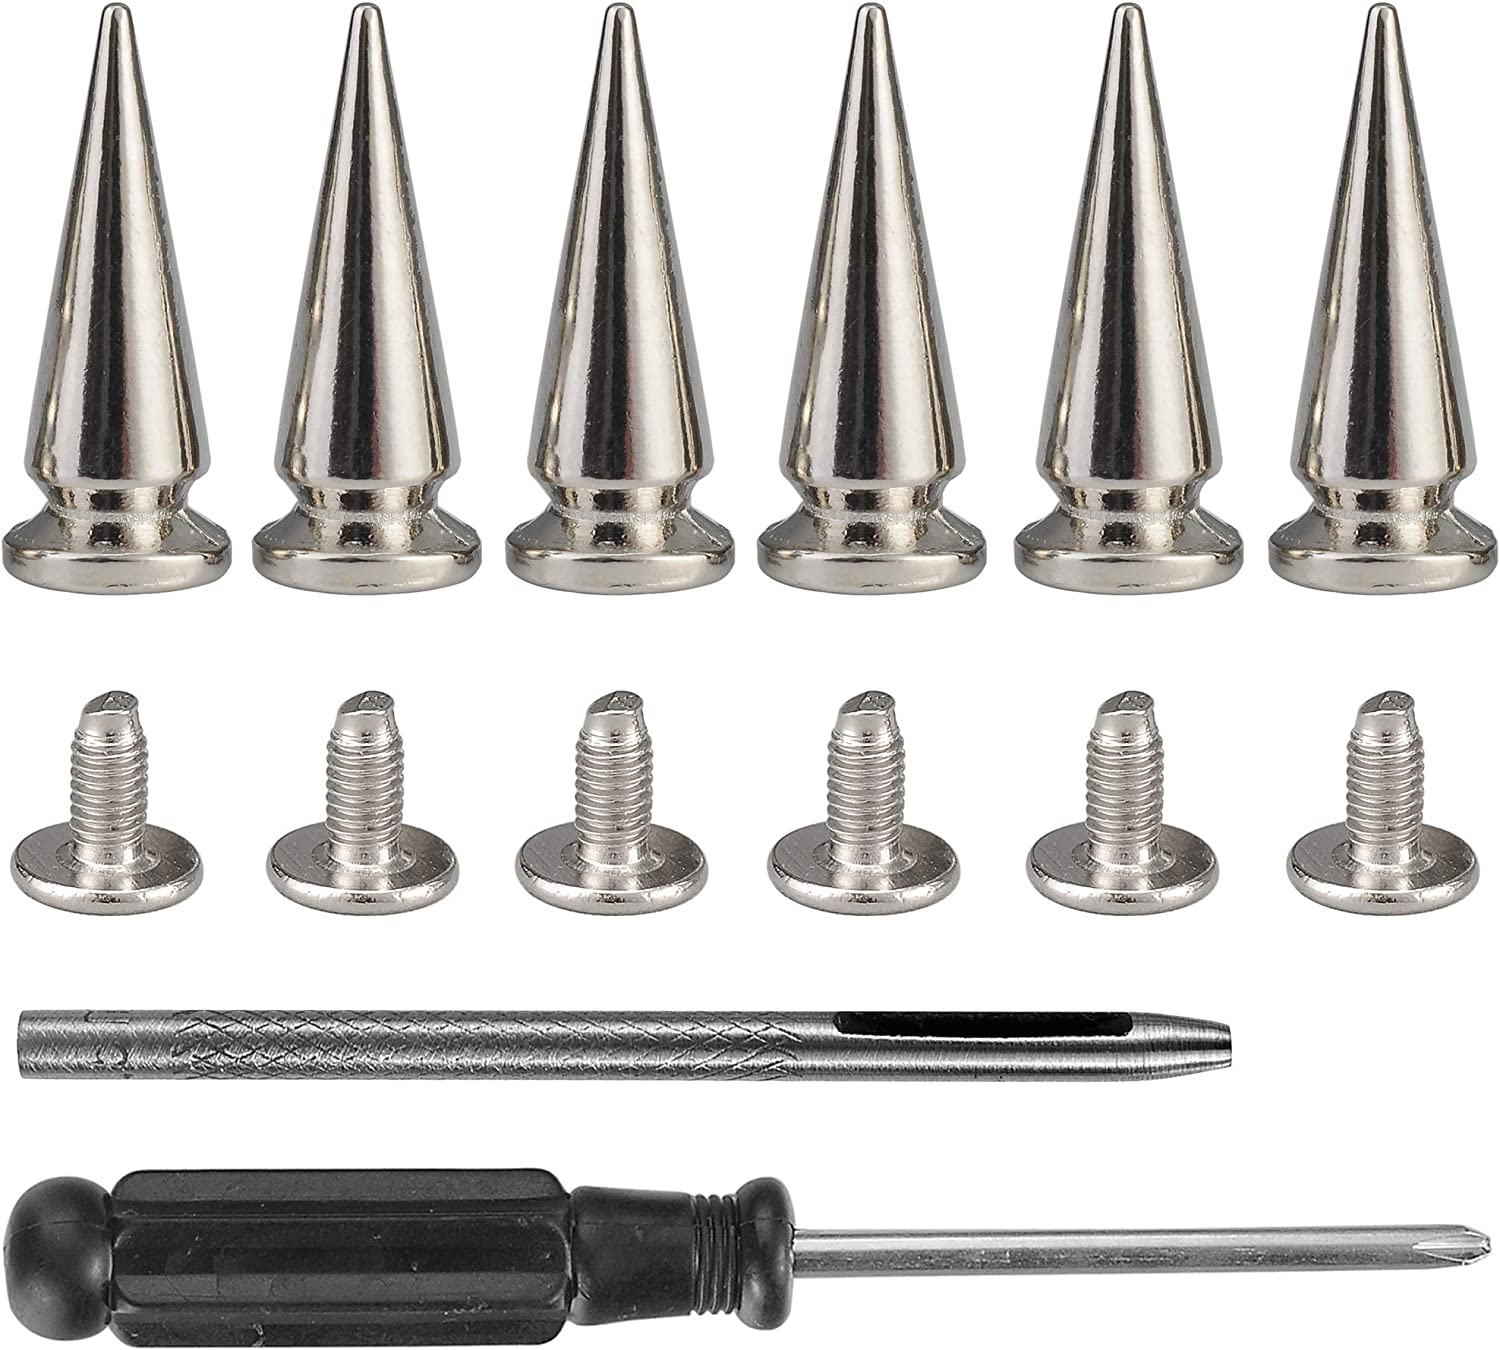 Punk Spikes And Studs, 60 Pcs Metal Punk Studs, Bullet Cone Spikes